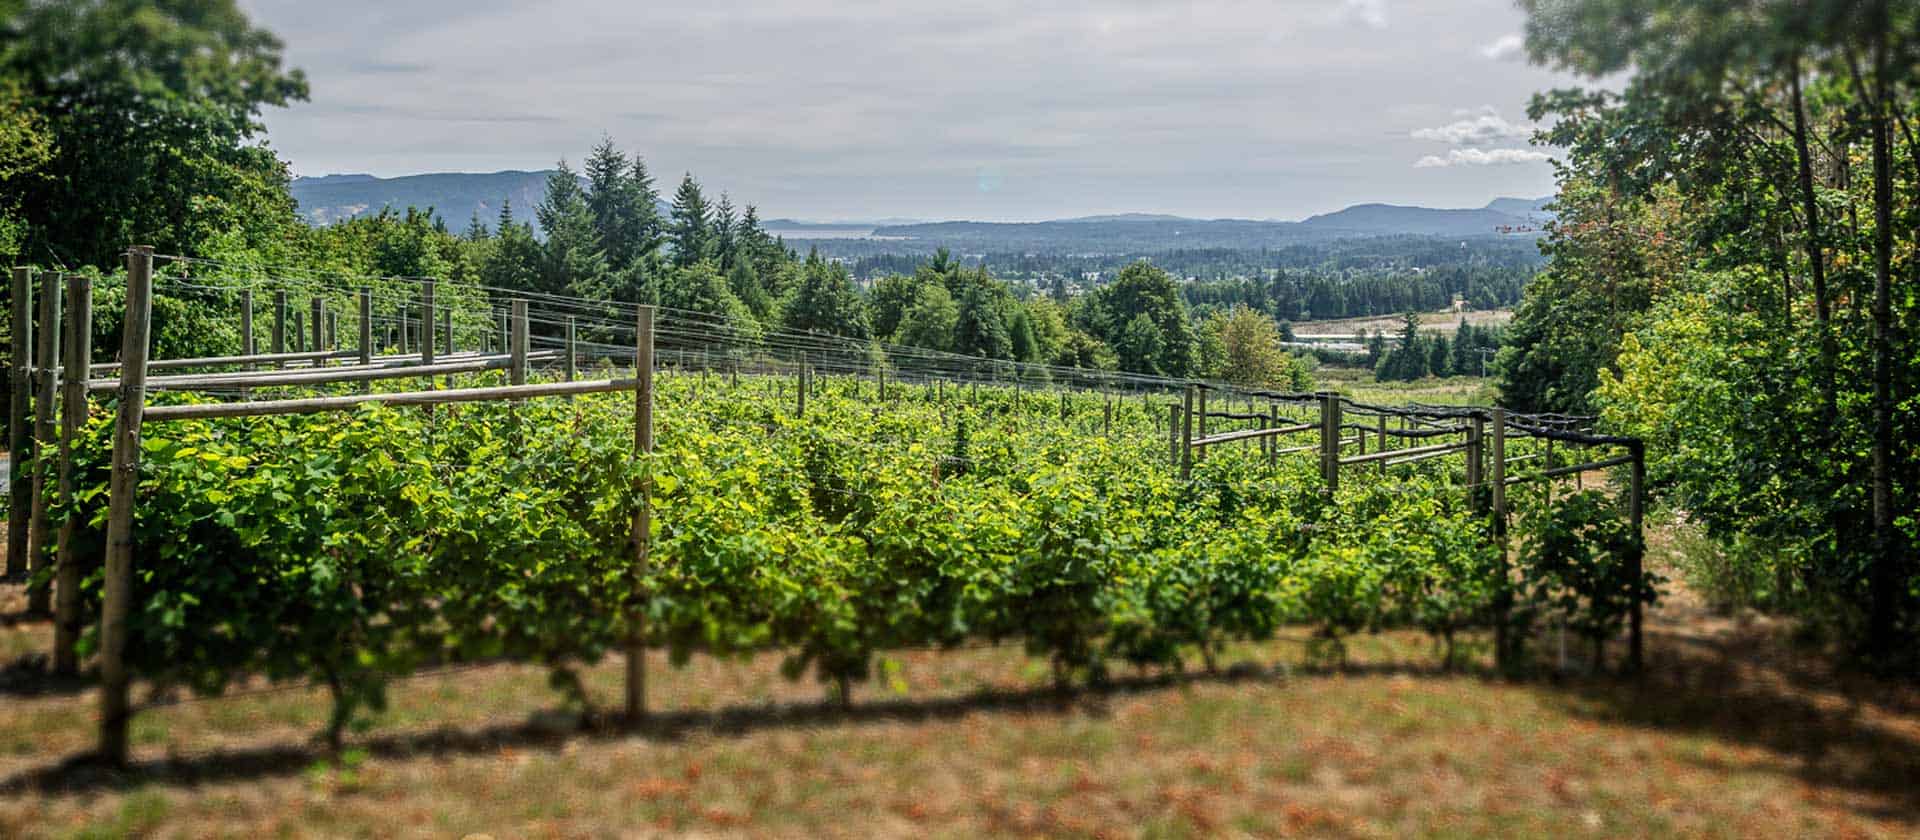 winery tours vancouver island bc